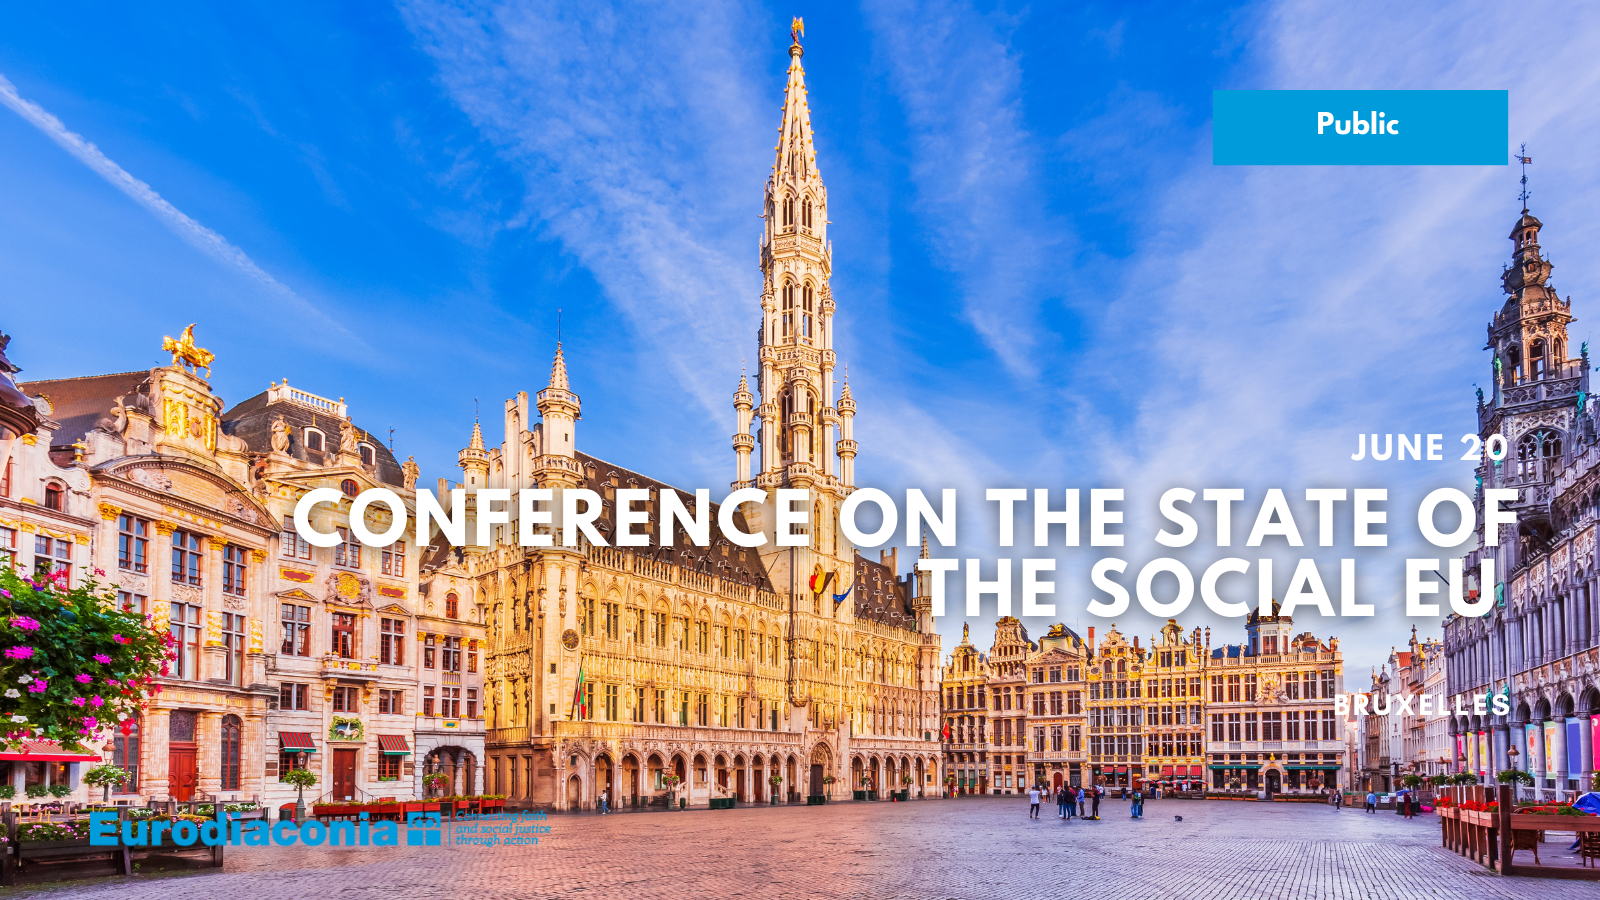 Conference on the State of the social EU |  Public Event in Brussels, Belgium